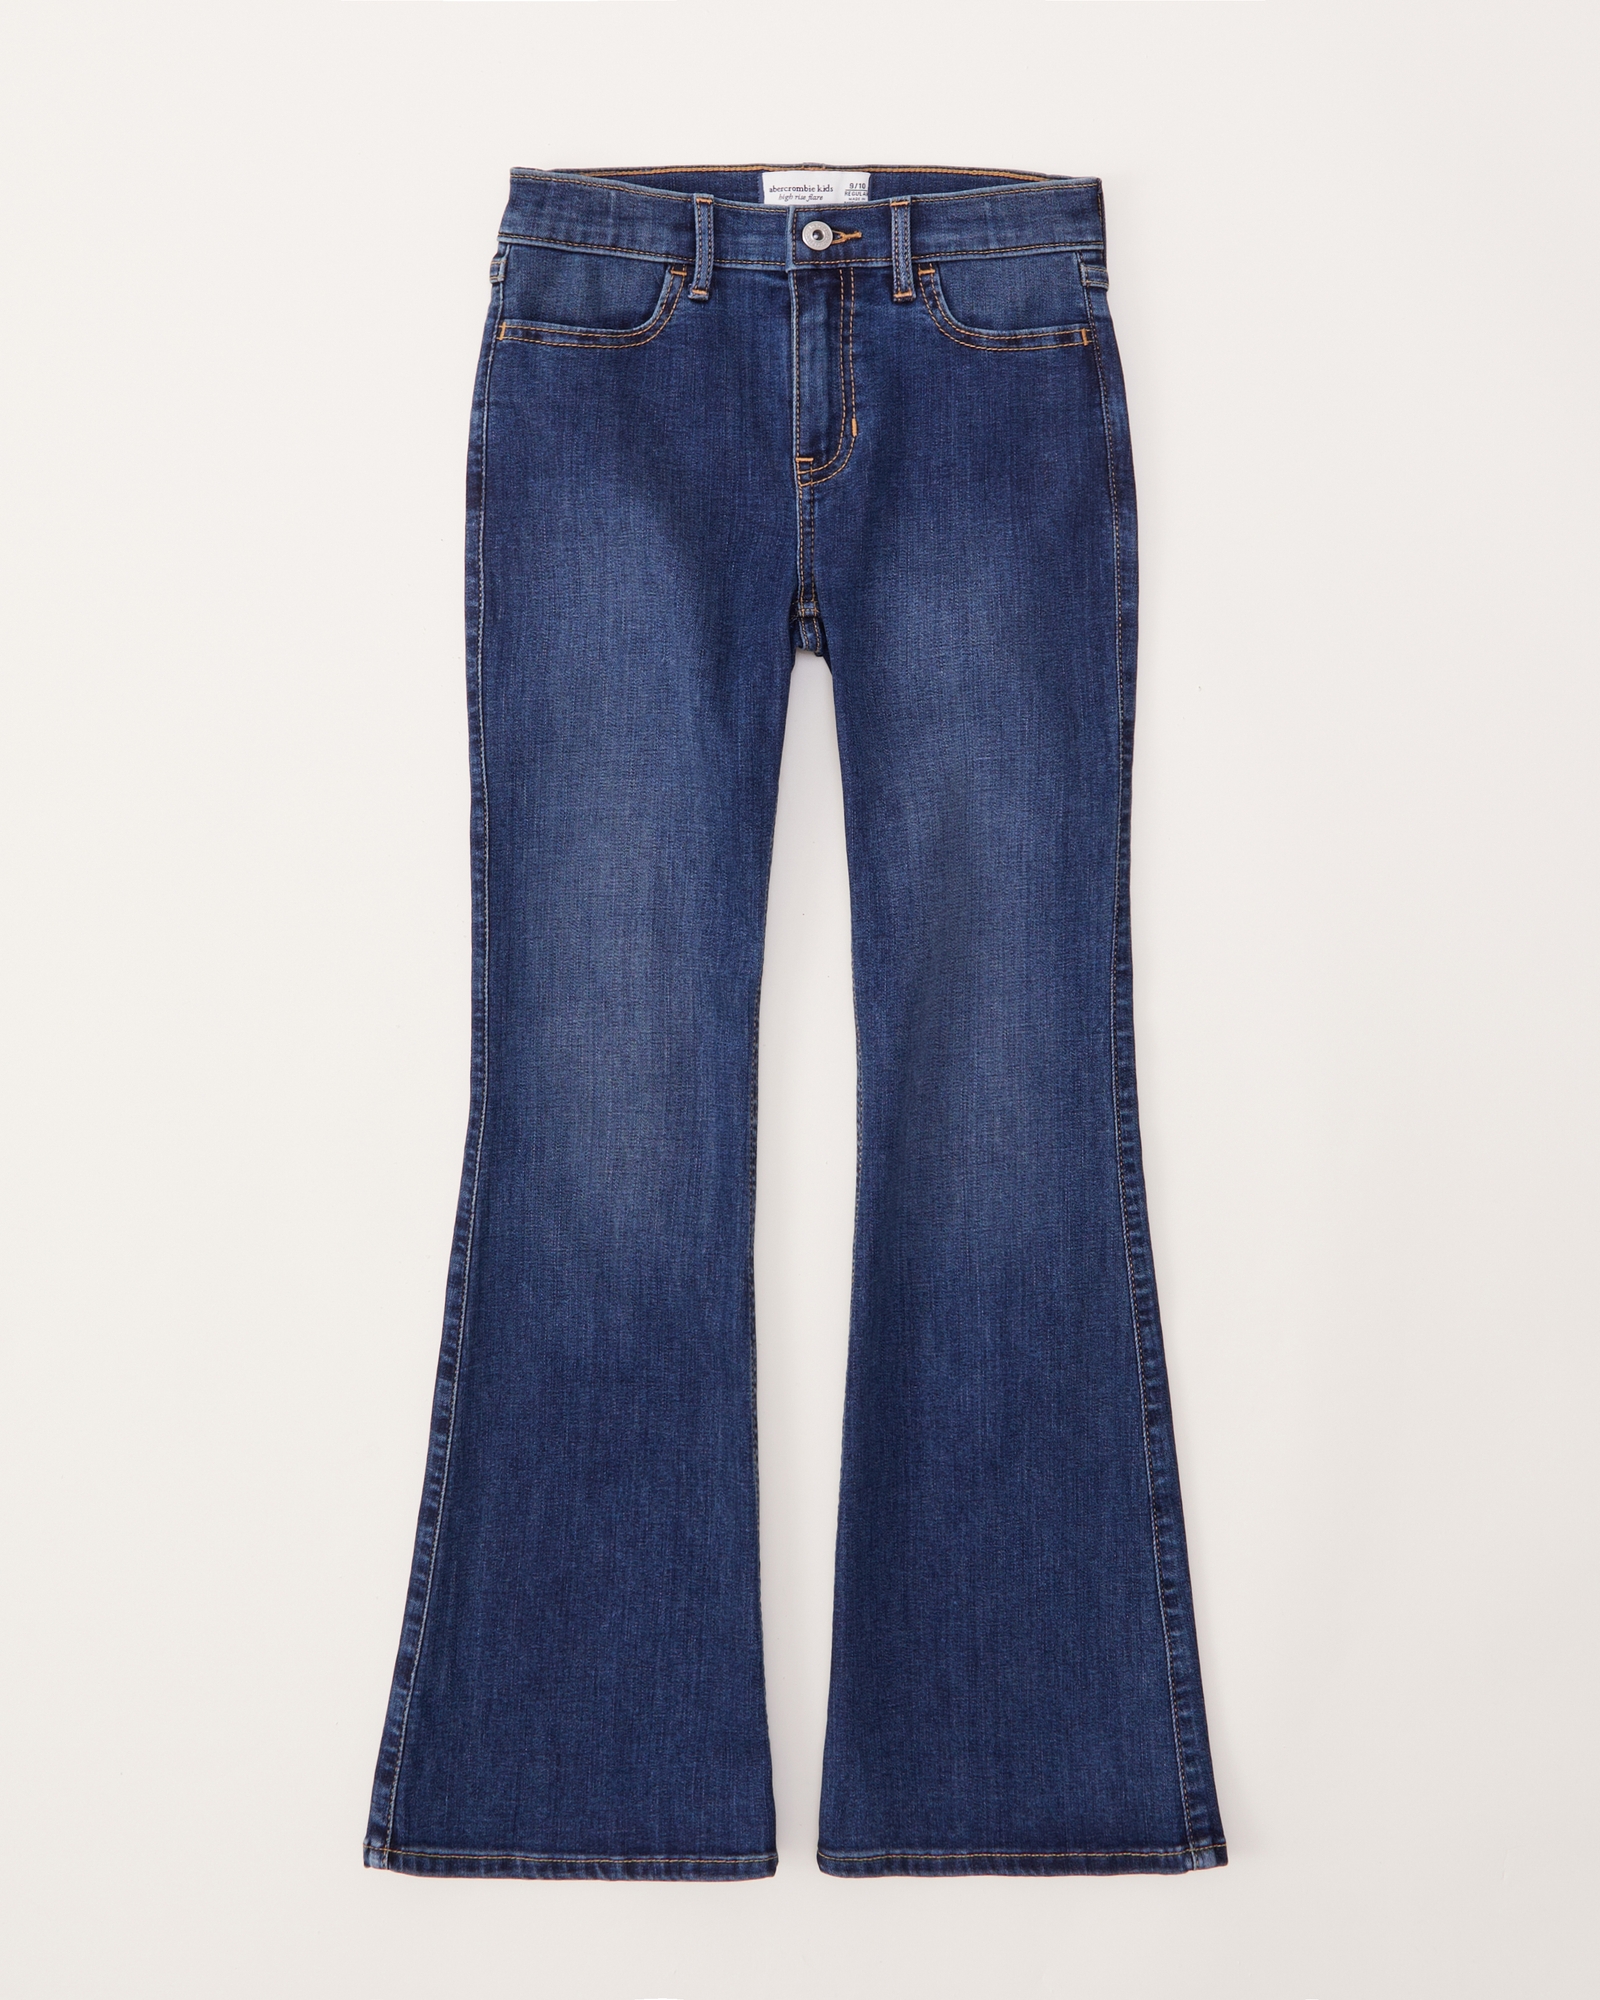 Abercrombie & Fitch Women's Simone High Rise Ankle Flare Jeans size 24 Blue  B9